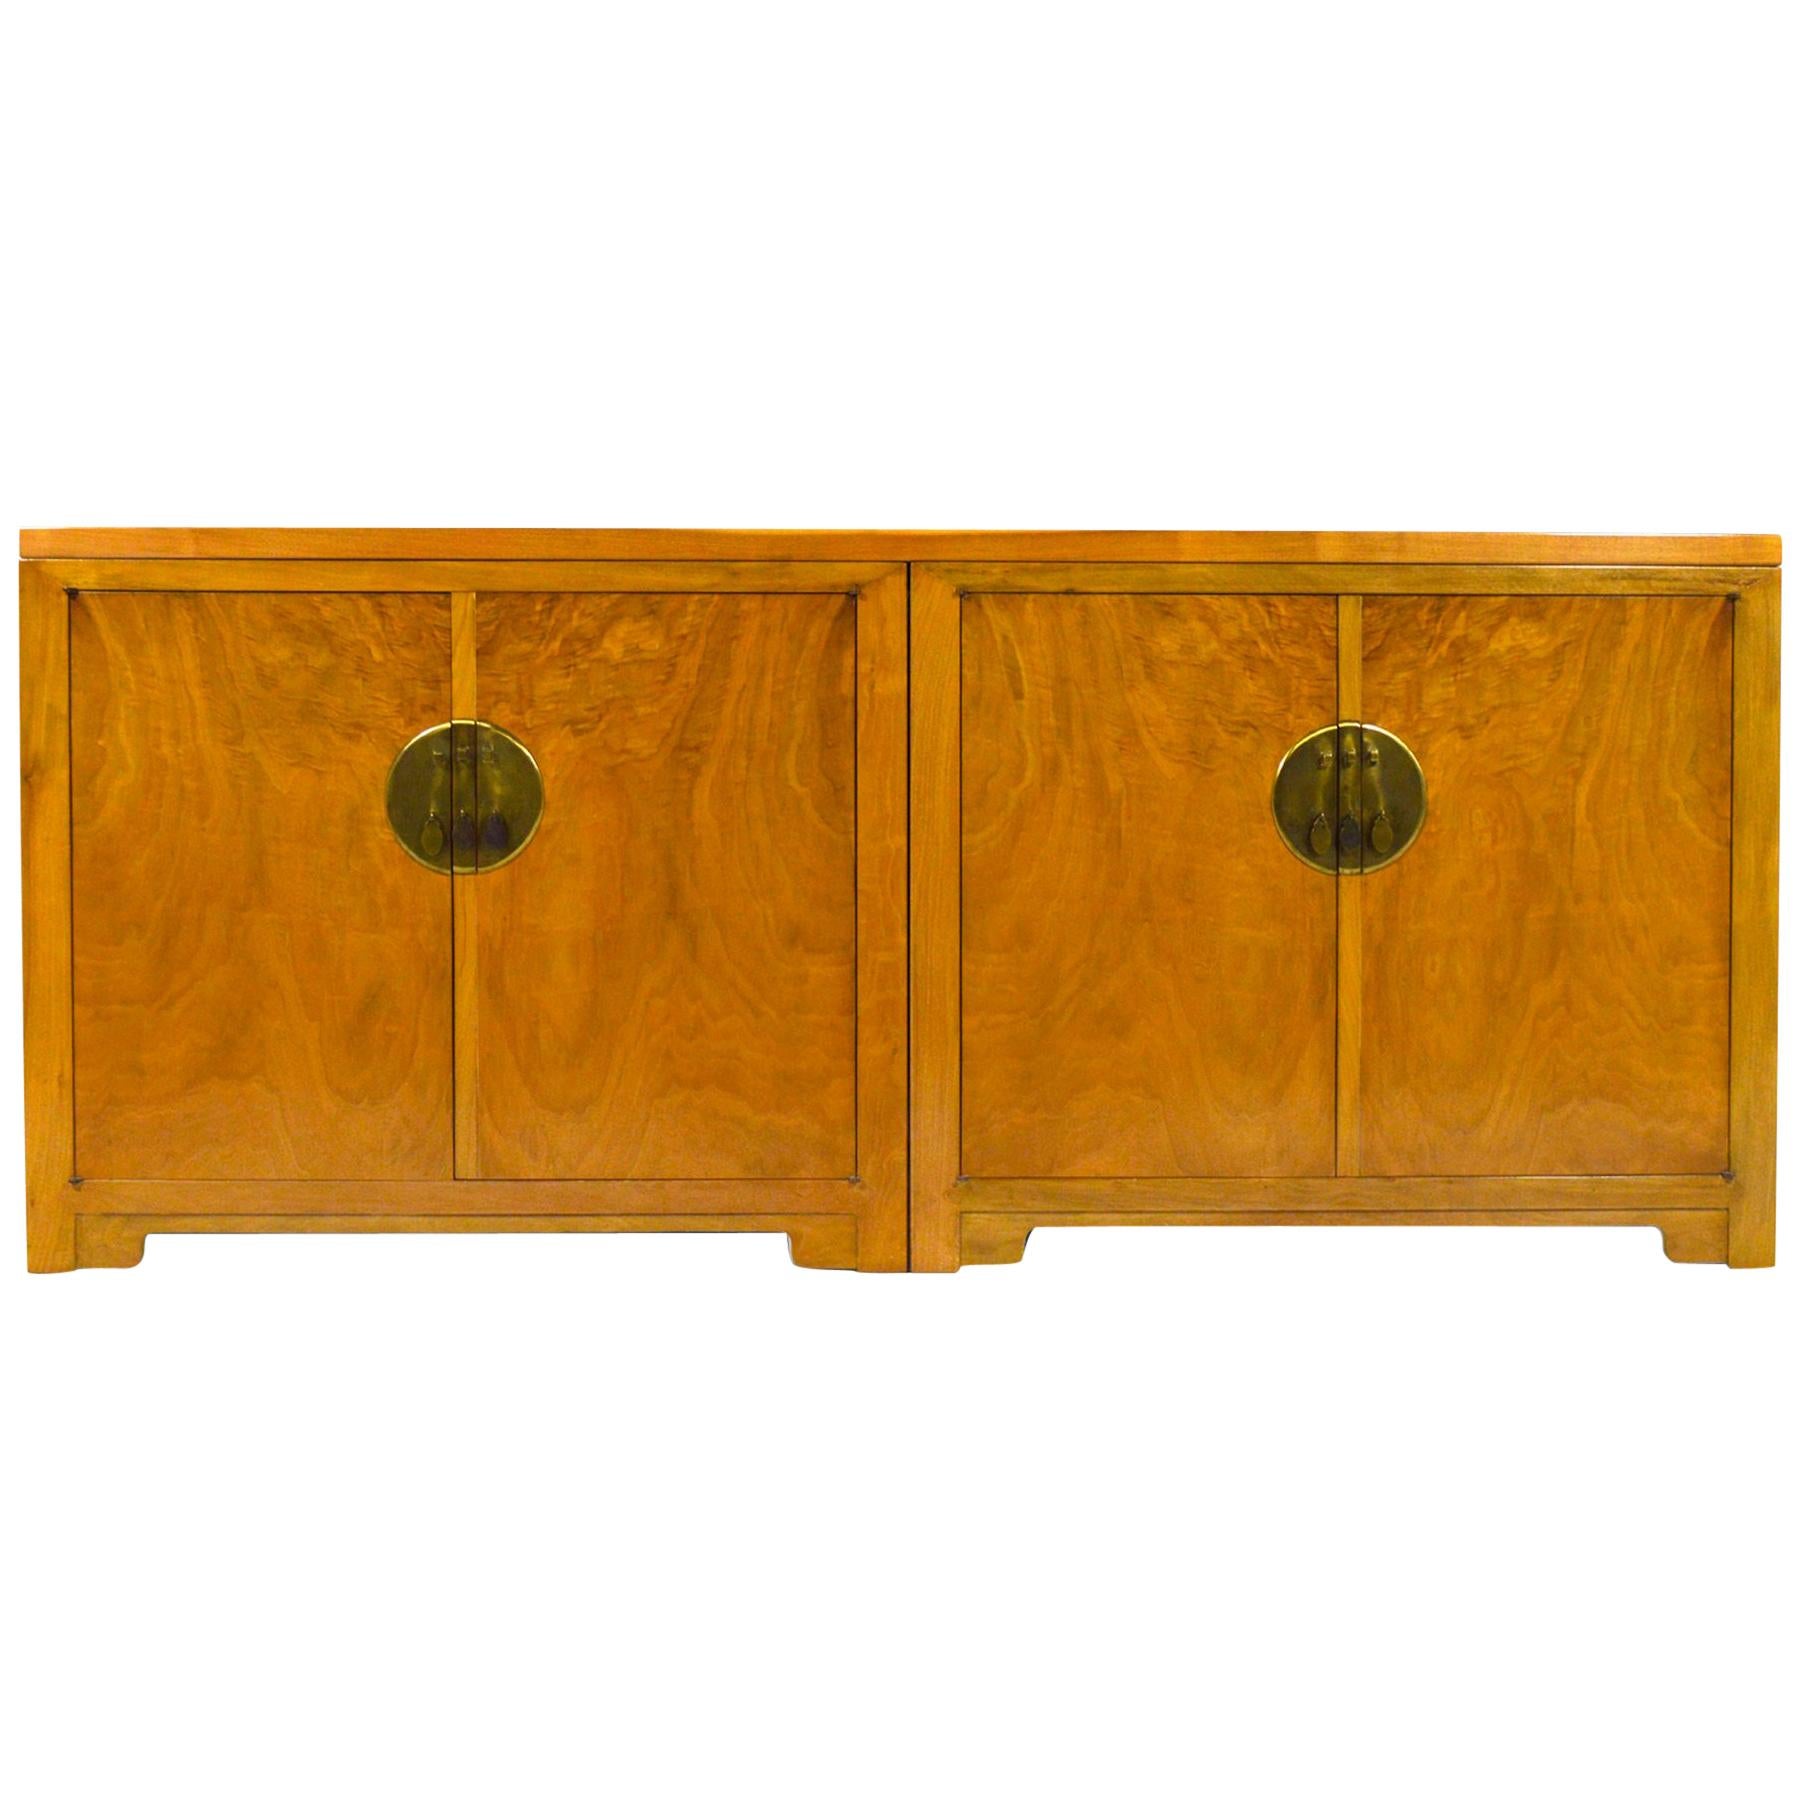 Michael Taylor "Far East" Credenza by Baker